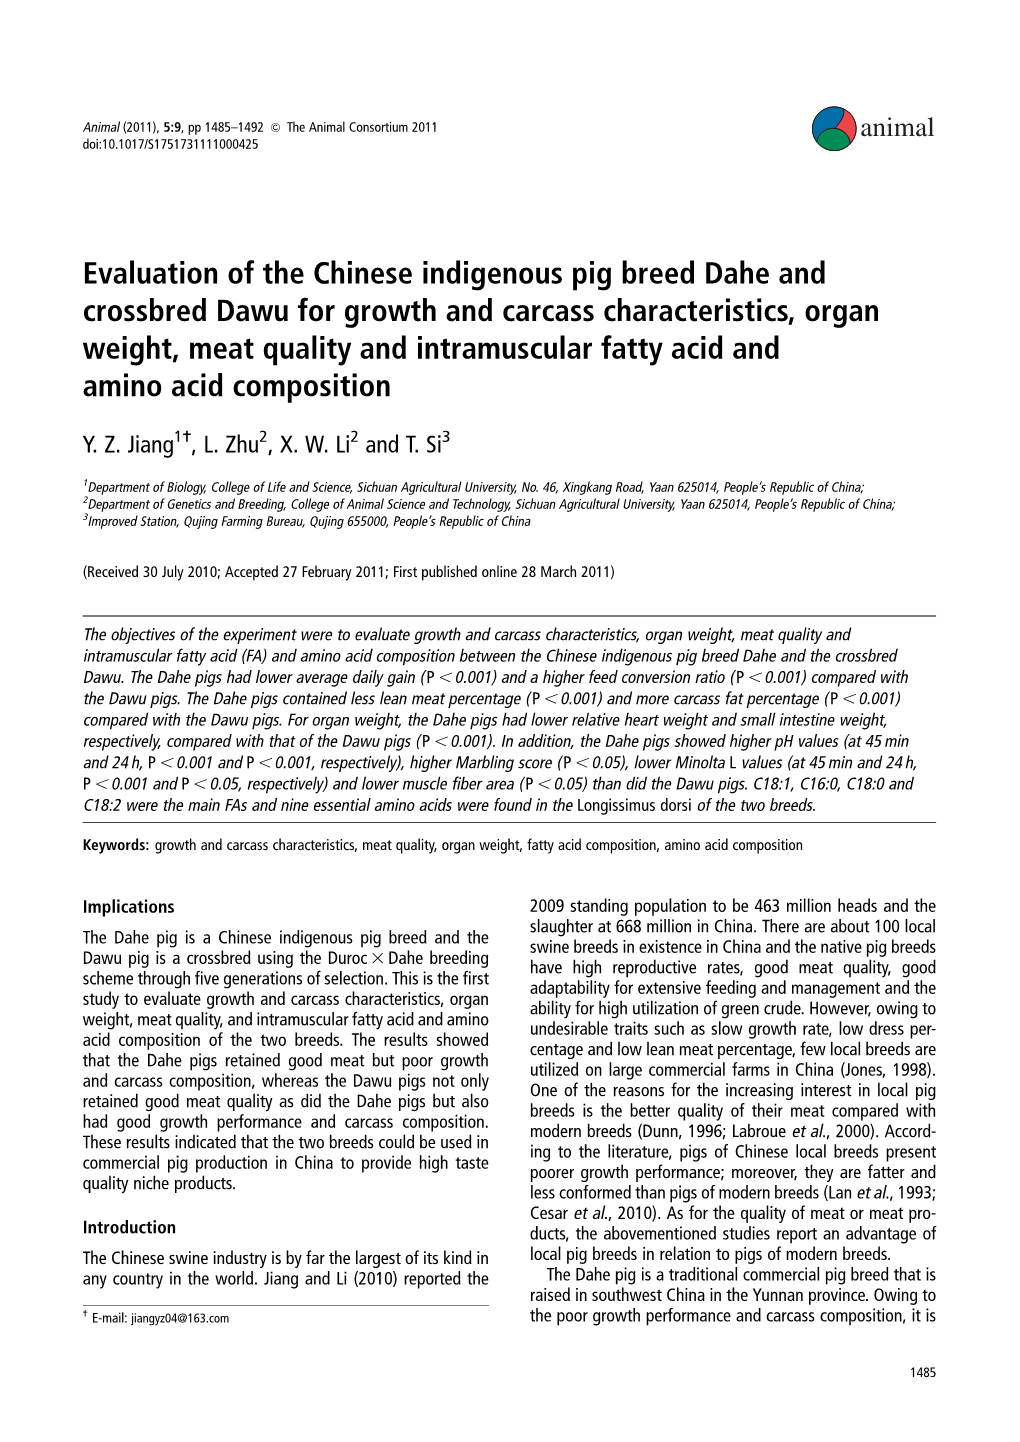 Evaluation of the Chinese Indigenous Pig Breed Dahe and Crossbred